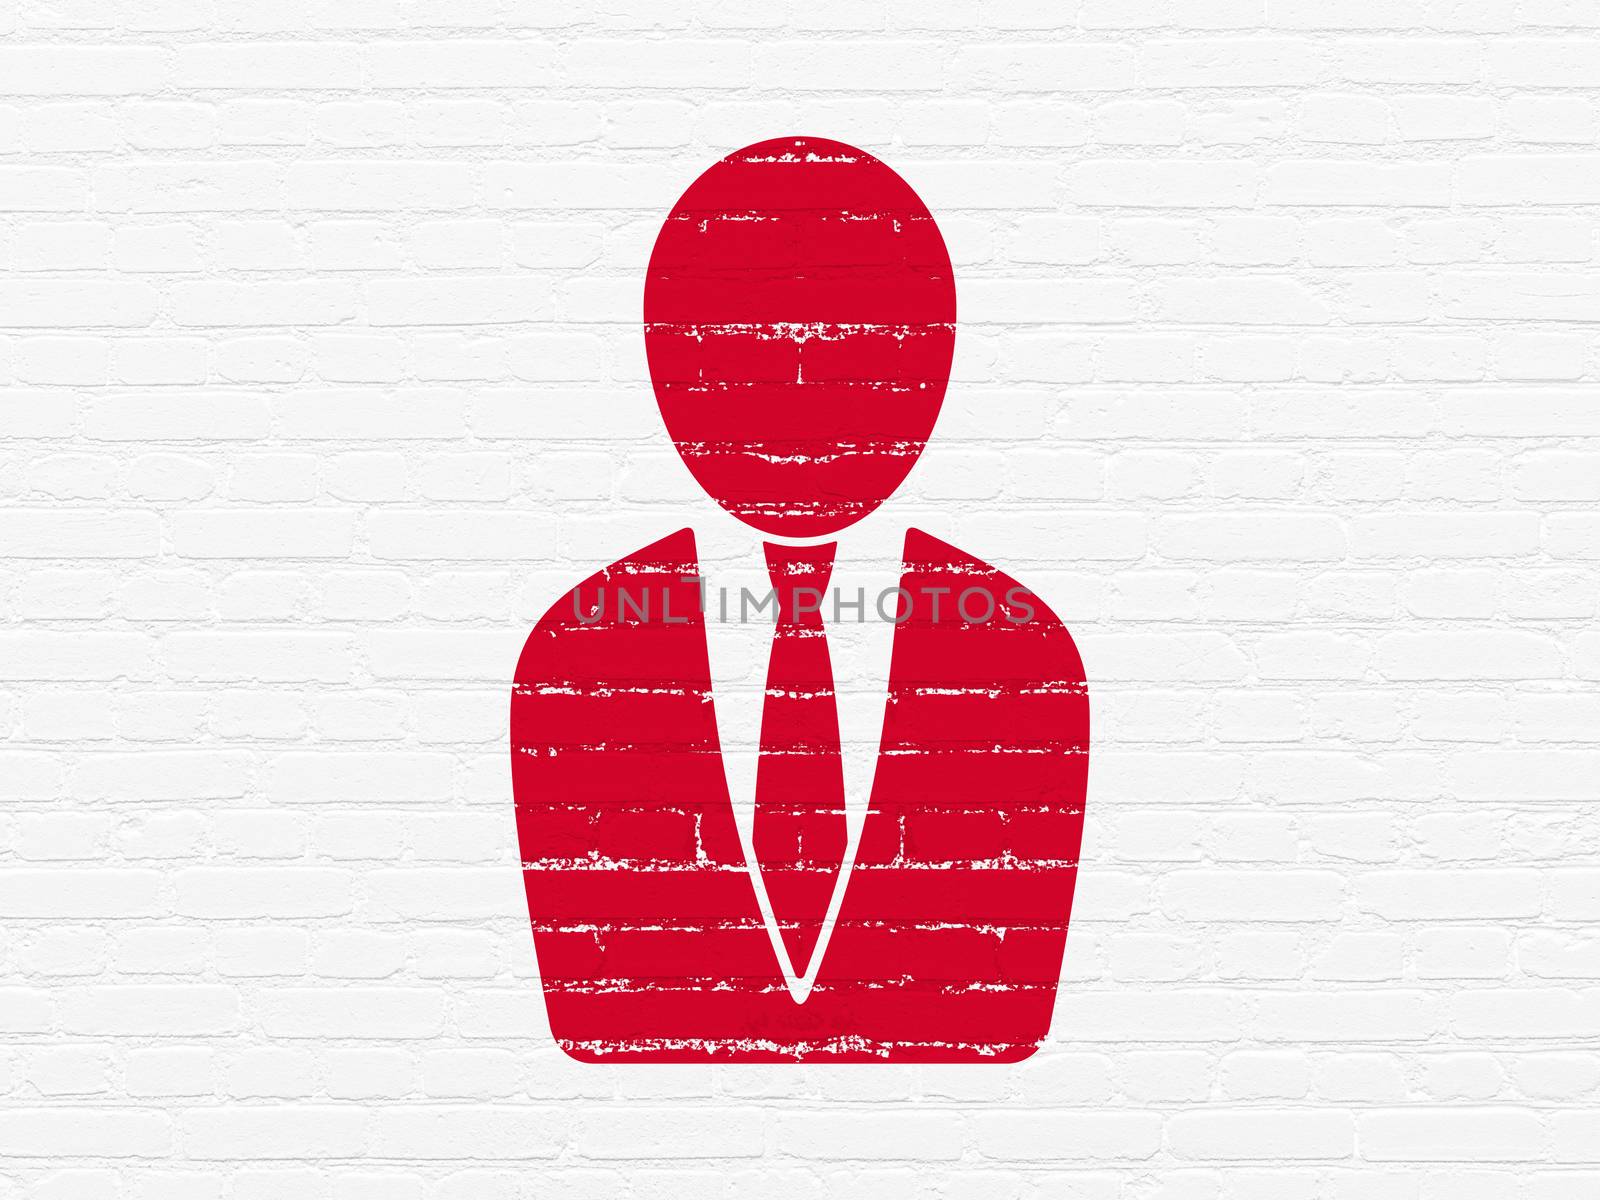 News concept: Painted red Business Man icon on White Brick wall background